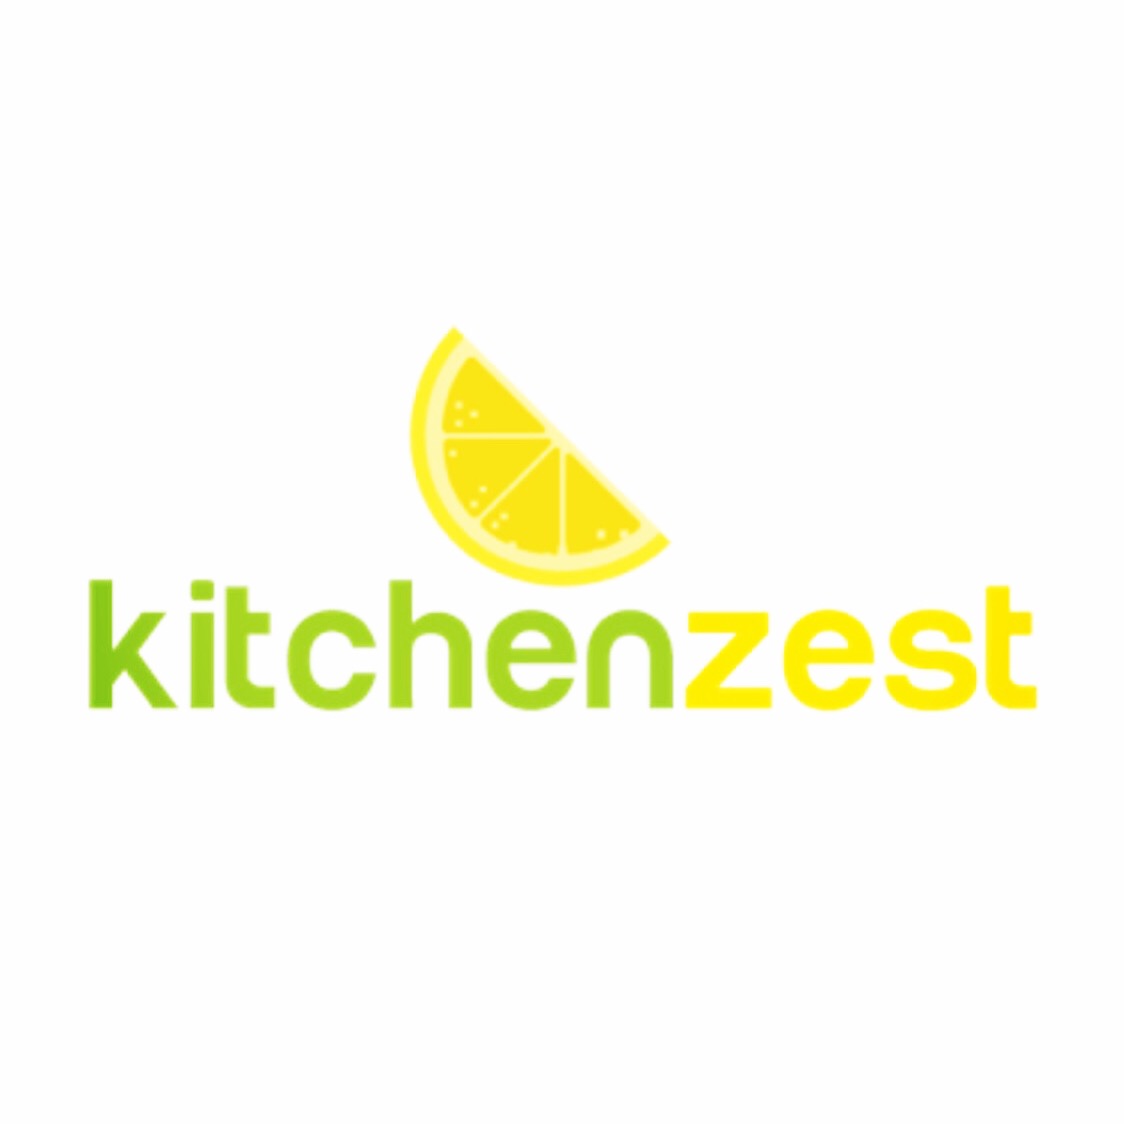 The logo of Kitchenzest is written with 'kitchen' in green  and 'zest' in yellow, with an image of half a lemon slice suspended slightly above it.  It represents health and vitality.